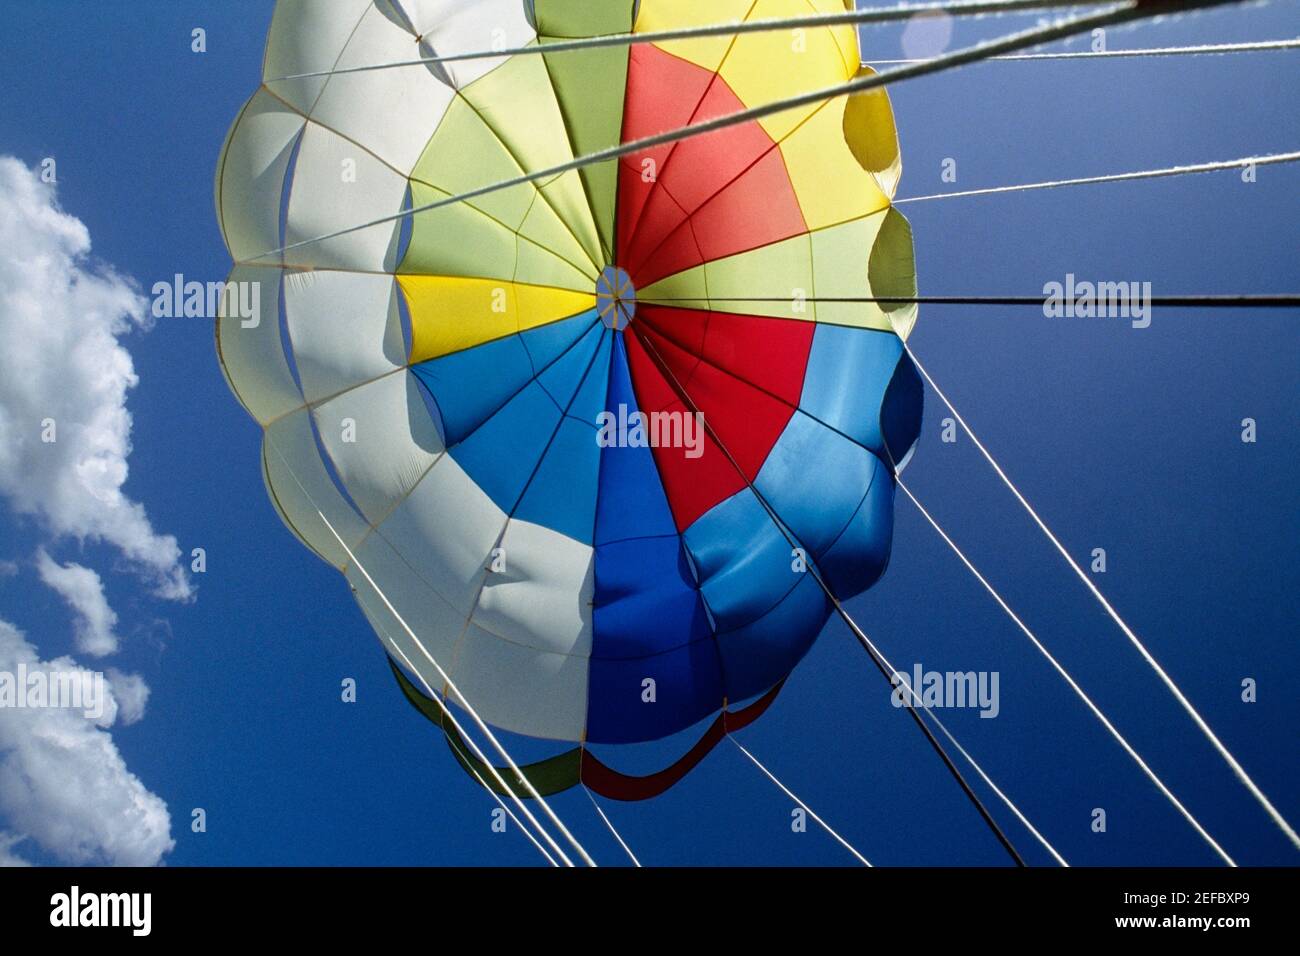 View of the canopy of a parasail, Negril Beach, Jamaica Stock Photo